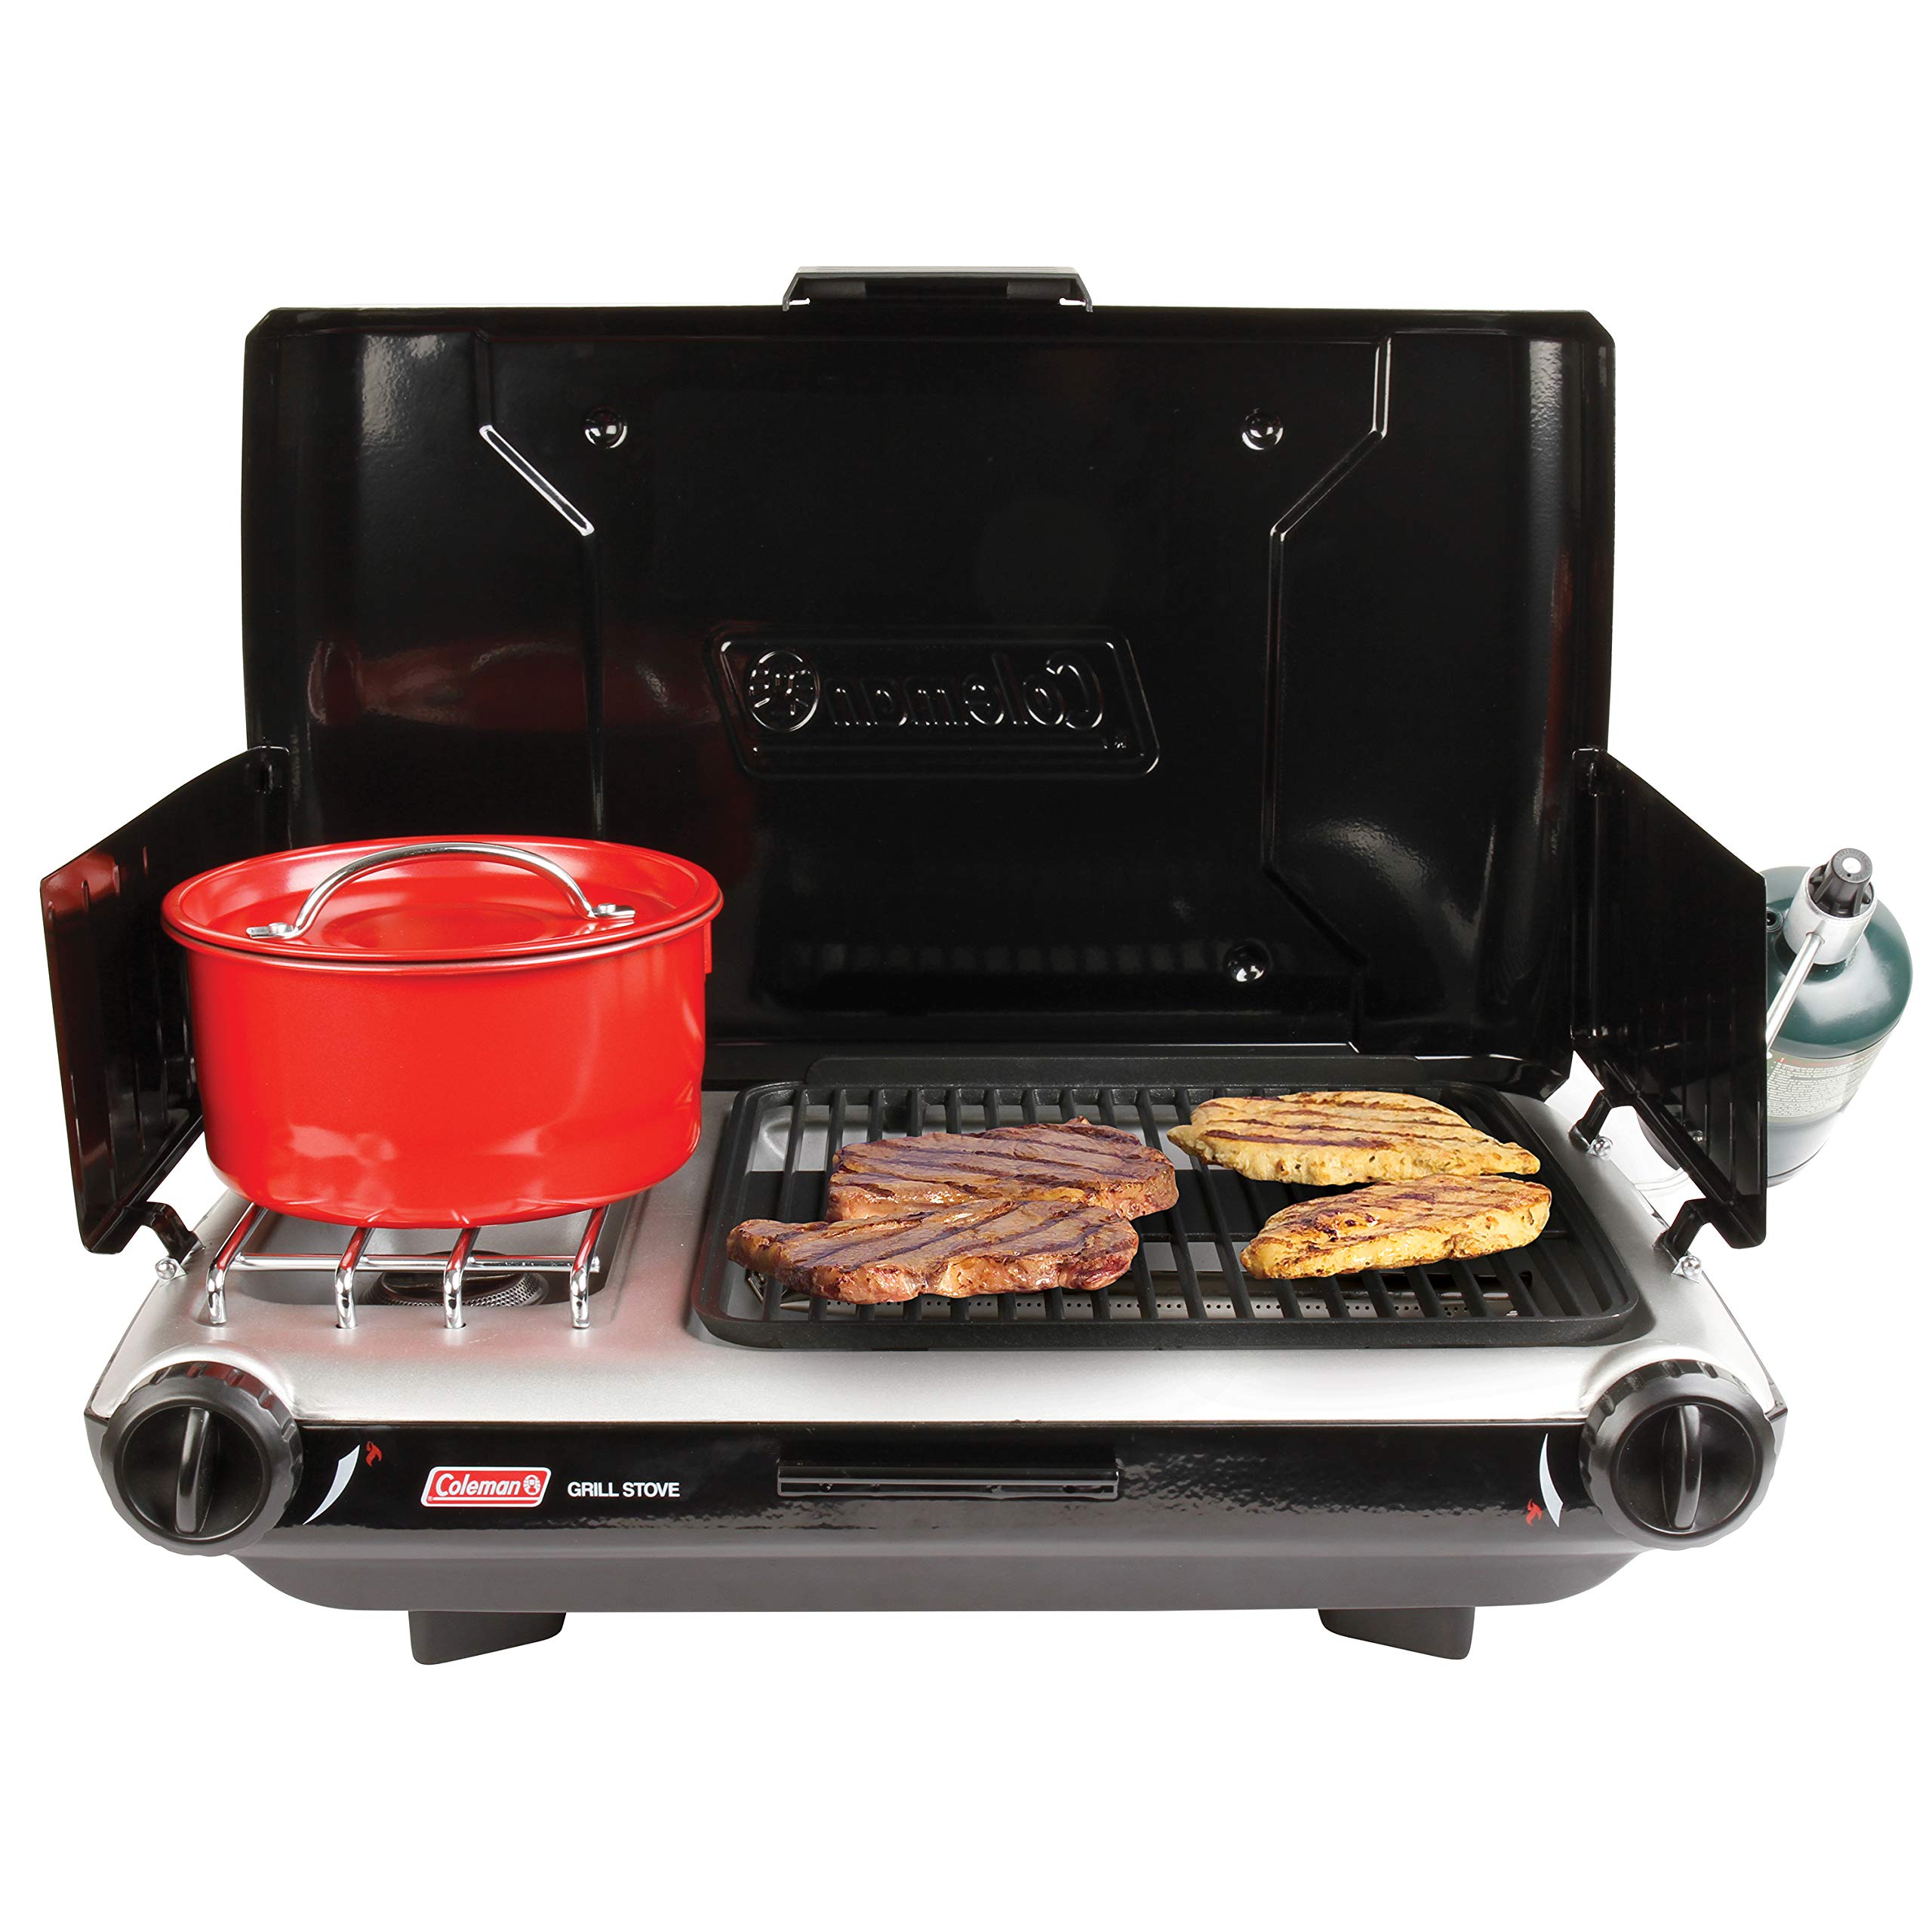 Coleman Tabletop 2-in-1 Camping Grill/Stove, 2-Burner Propane Grill and Stove for Outdoor Cooking with Adjustable Burners and Pressure Regulator, 20,000 BTUs of Power